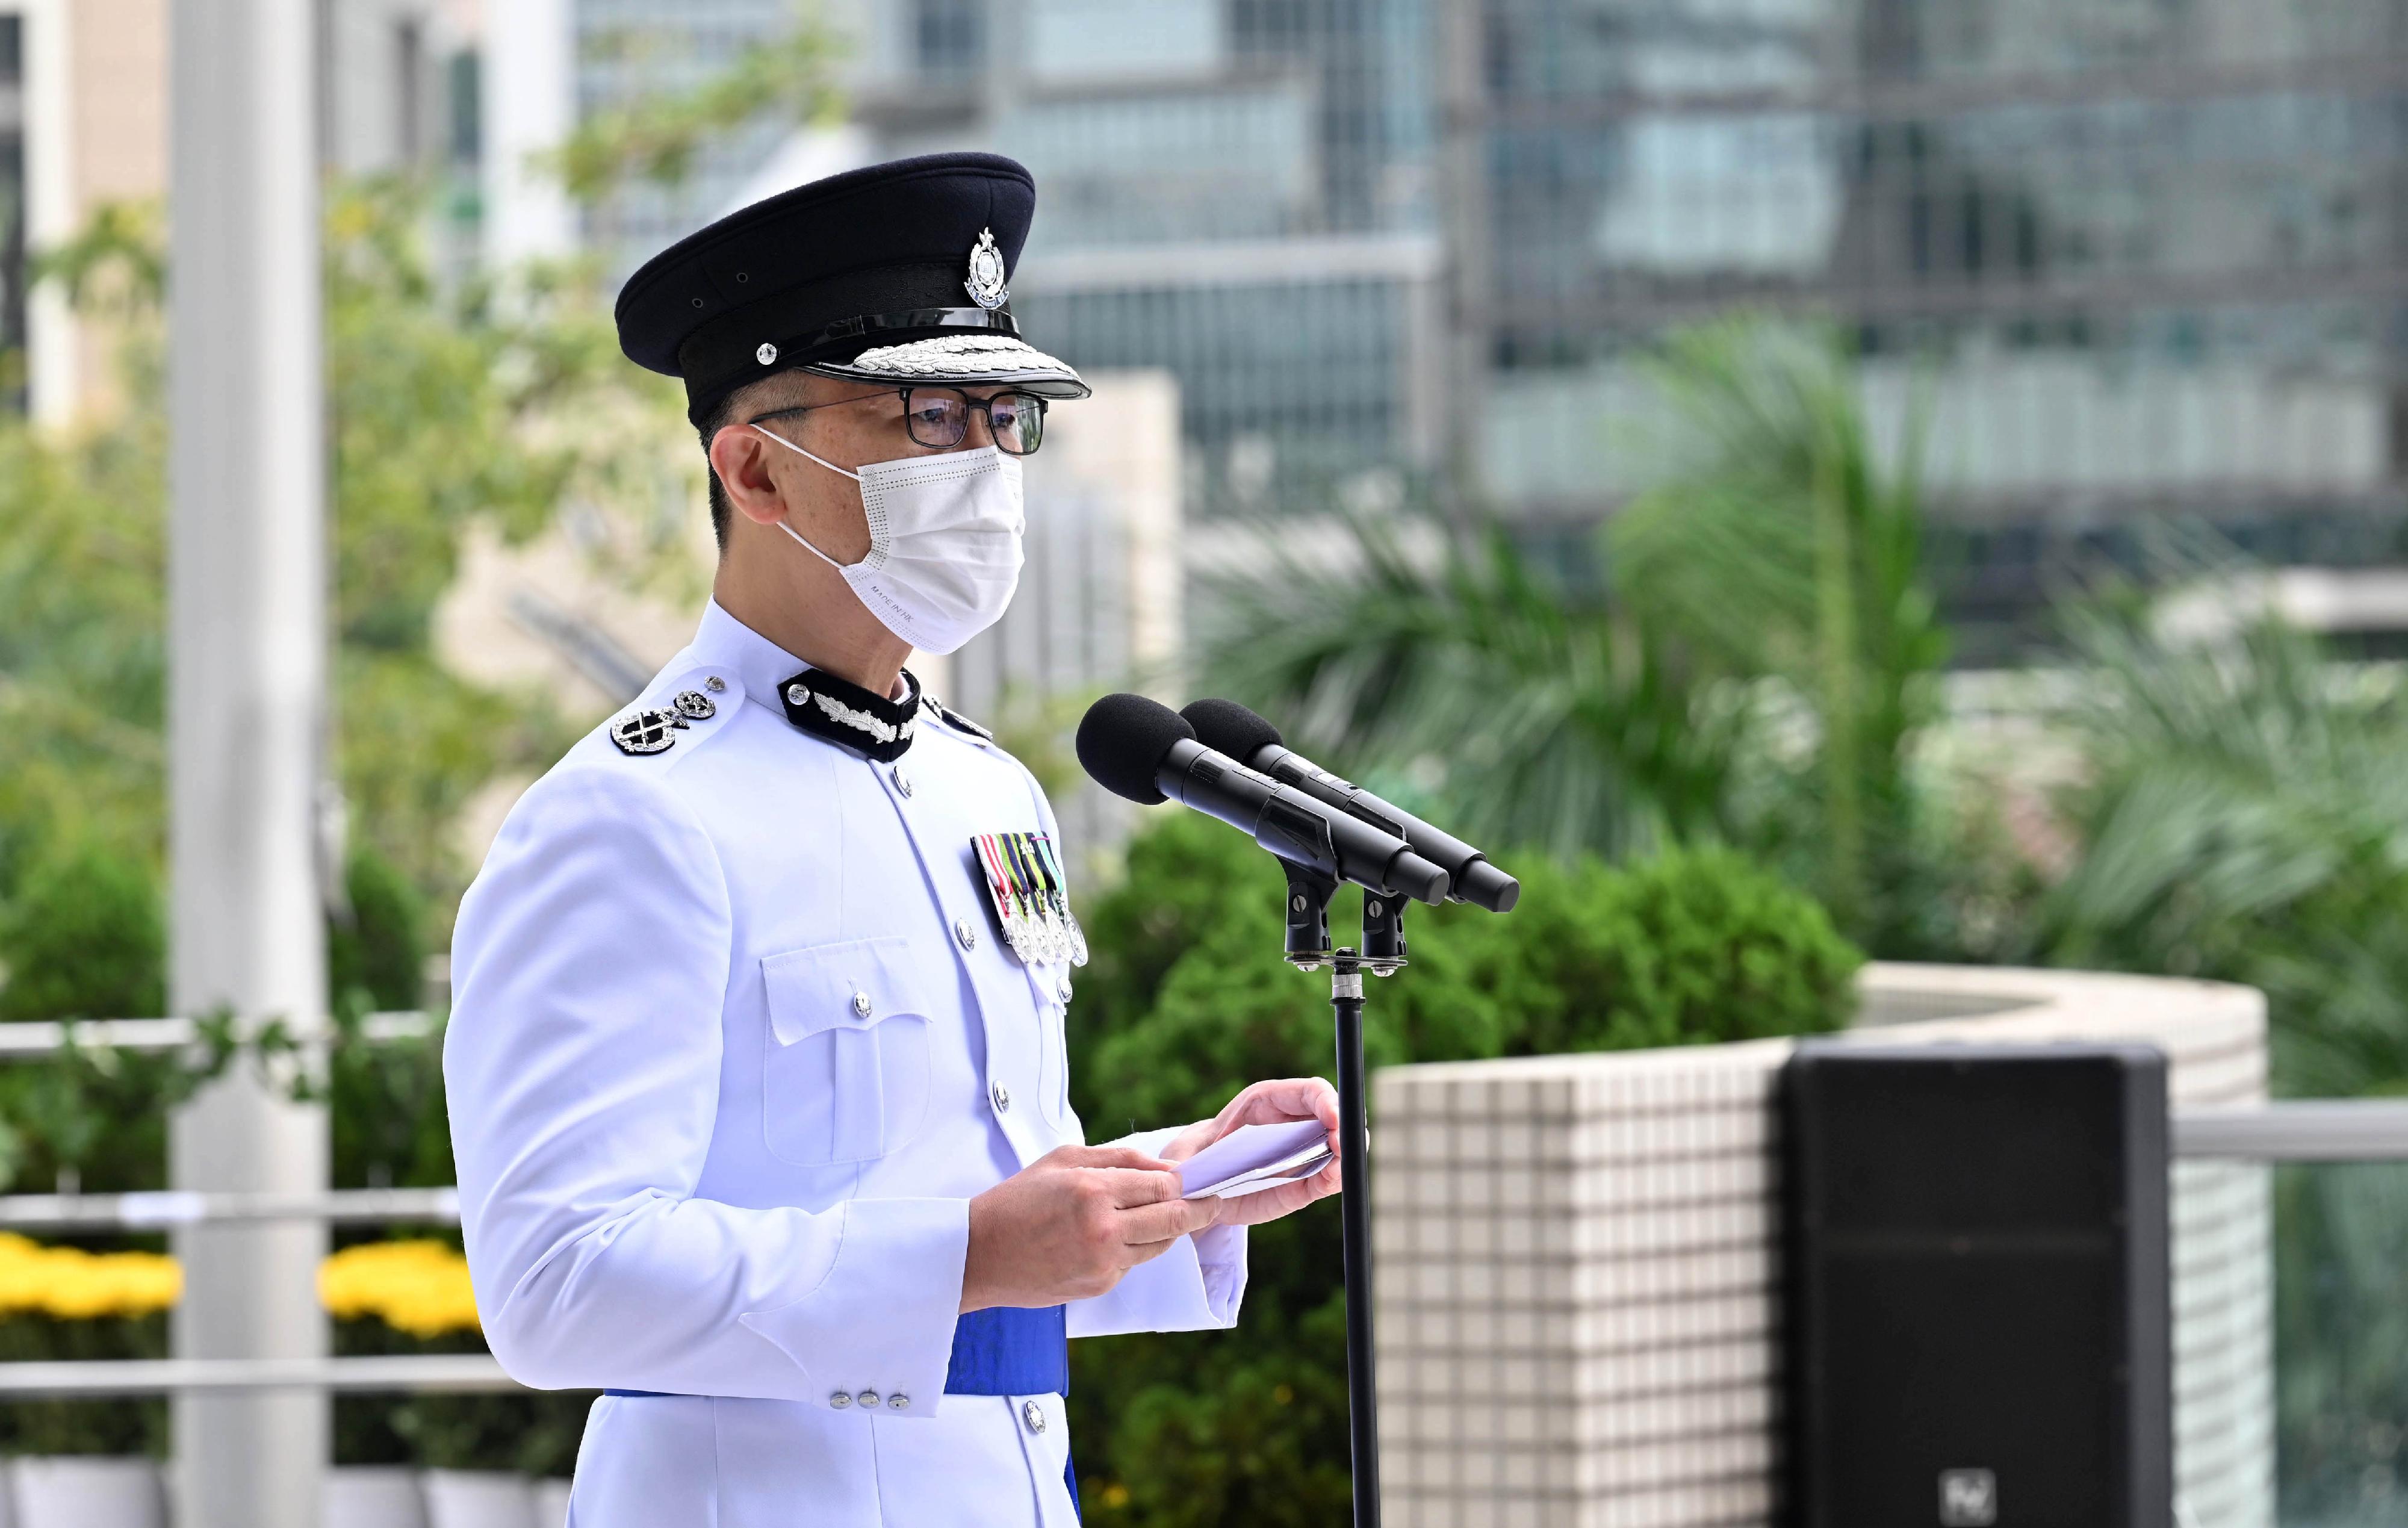 The Hong Kong Police Force holds a ceremony at the Police Headquarters this morning (November 11) to pay tribute to members of the Hong Kong Police Force and Hong Kong Auxiliary Police Force who have given their lives in the line of duty. Photo shows the Commissioner of Police, Mr Siu Chak-yee, giving a speech at the ceremony.